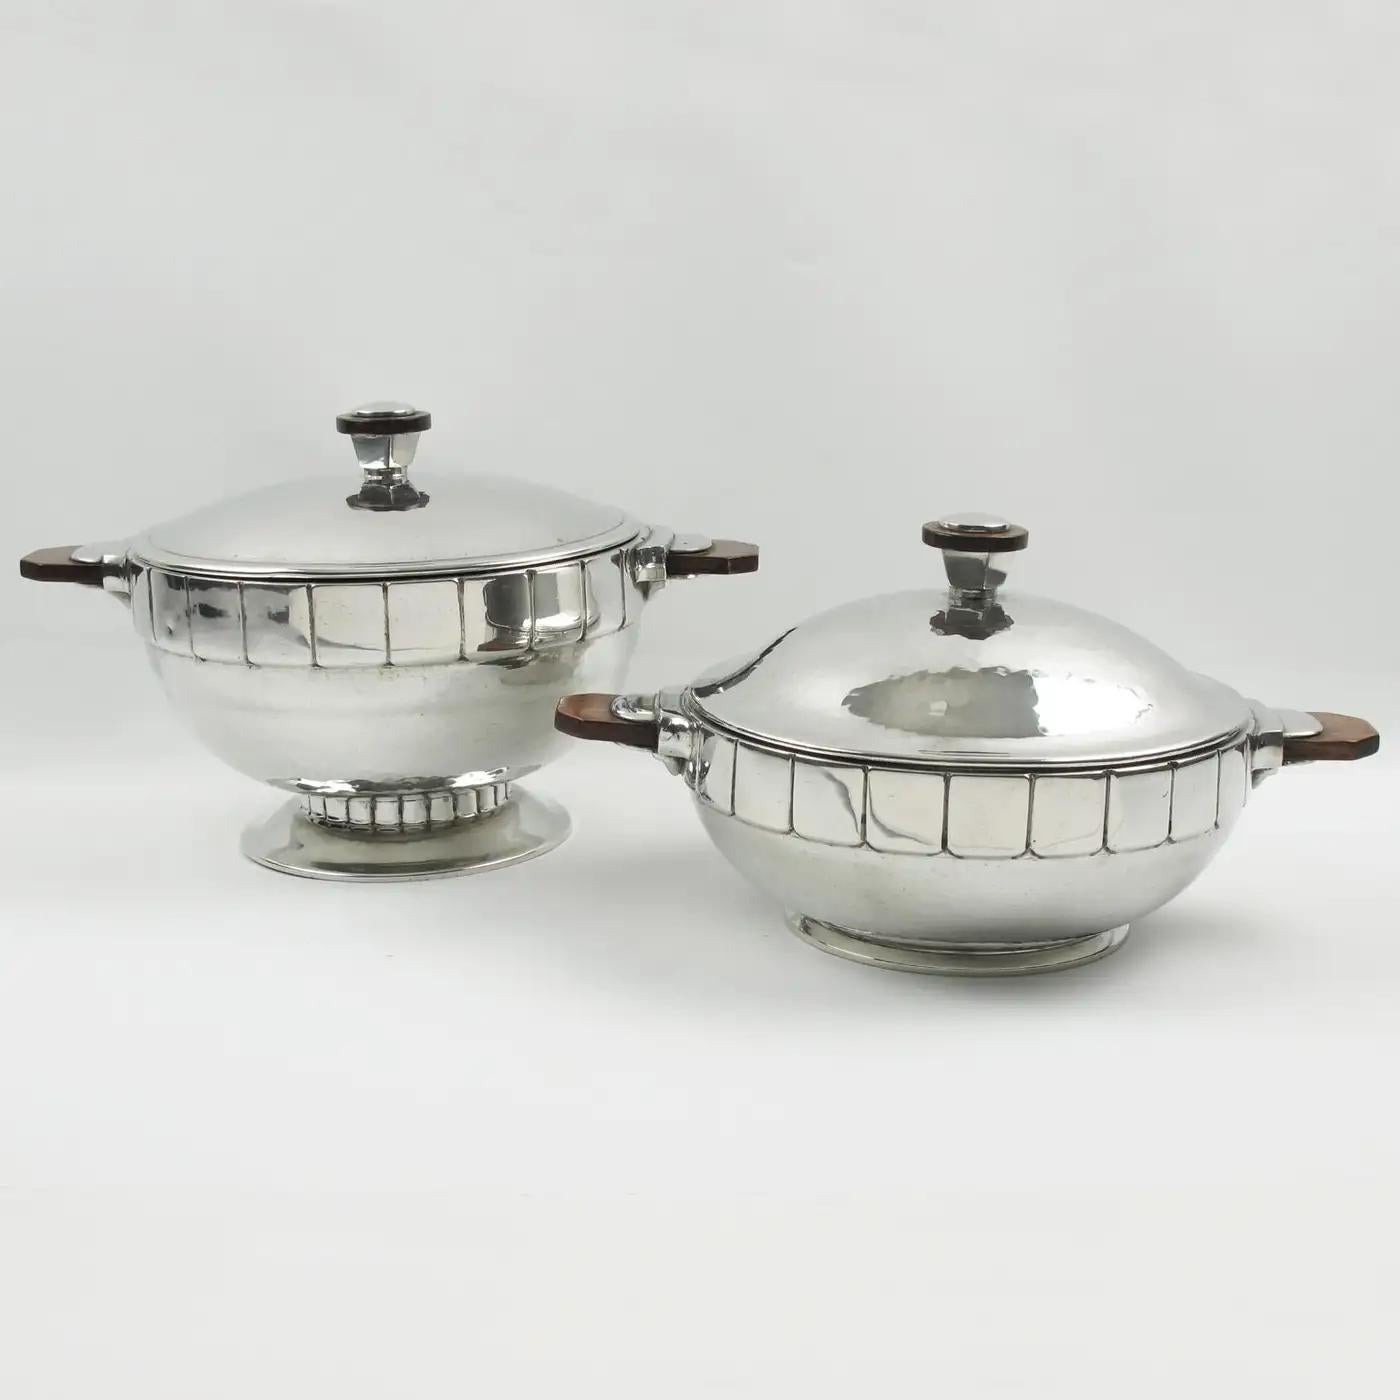 Mid-20th Century Pewter Tureen Covered Dish Centerpiece by H.J. Geneve, 1940s For Sale